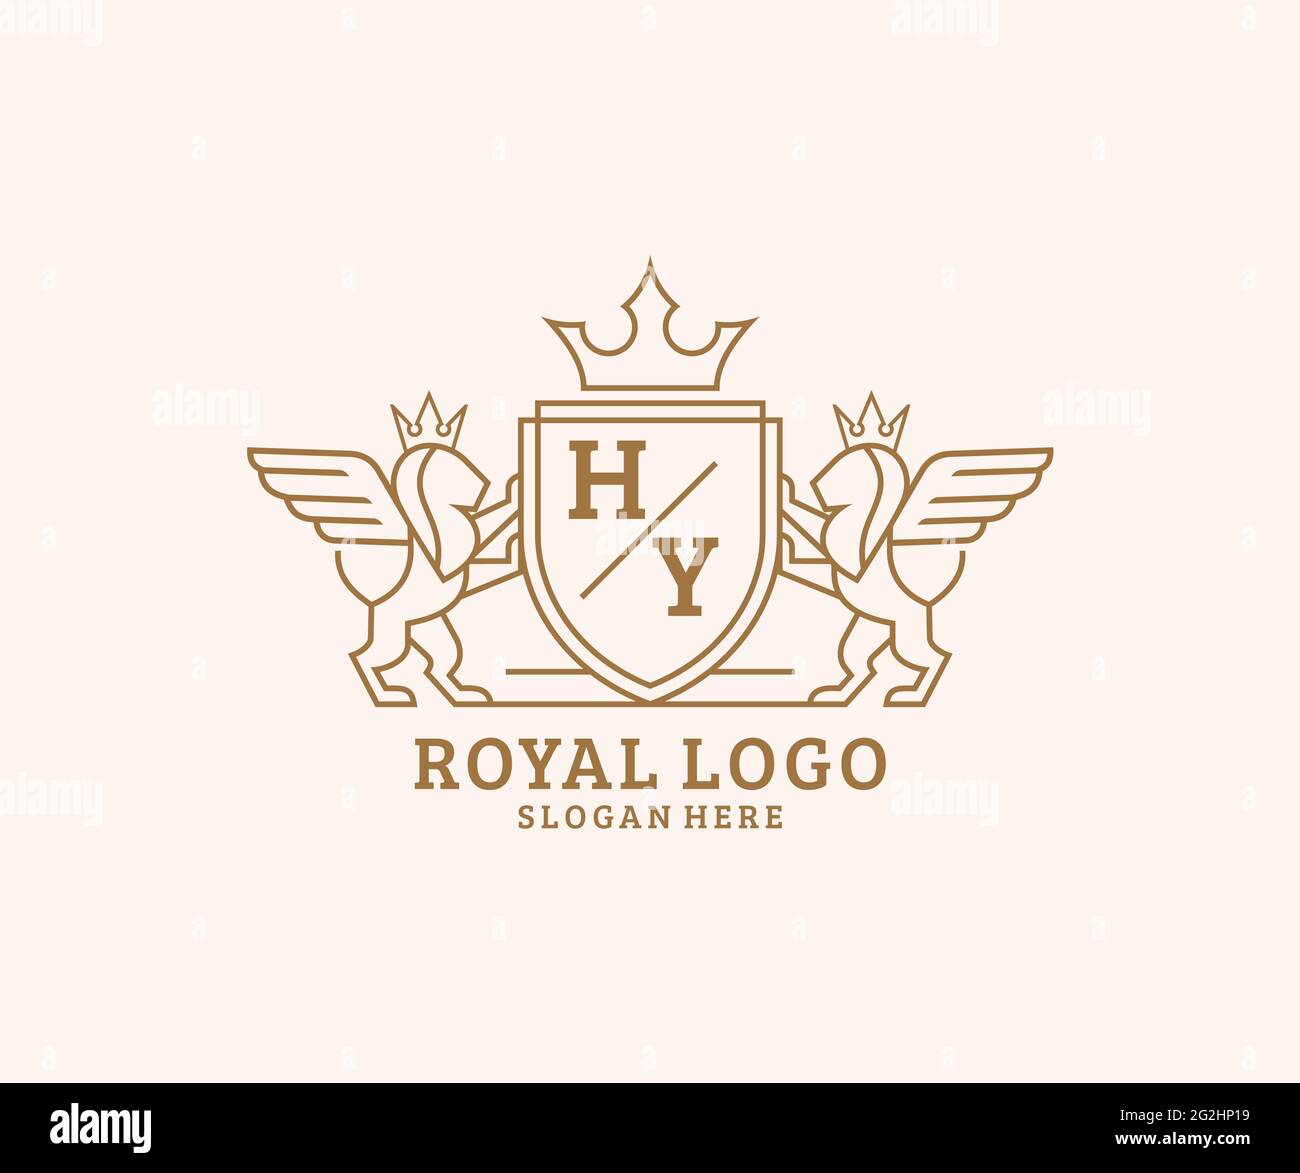 HY Letter Lion Royal Luxury Heraldic,Crest Logo template in vector art for Restaurant, Royalty, Boutique, Cafe, Hotel, Heraldic, Jewelry, Fashion and Stock Vector